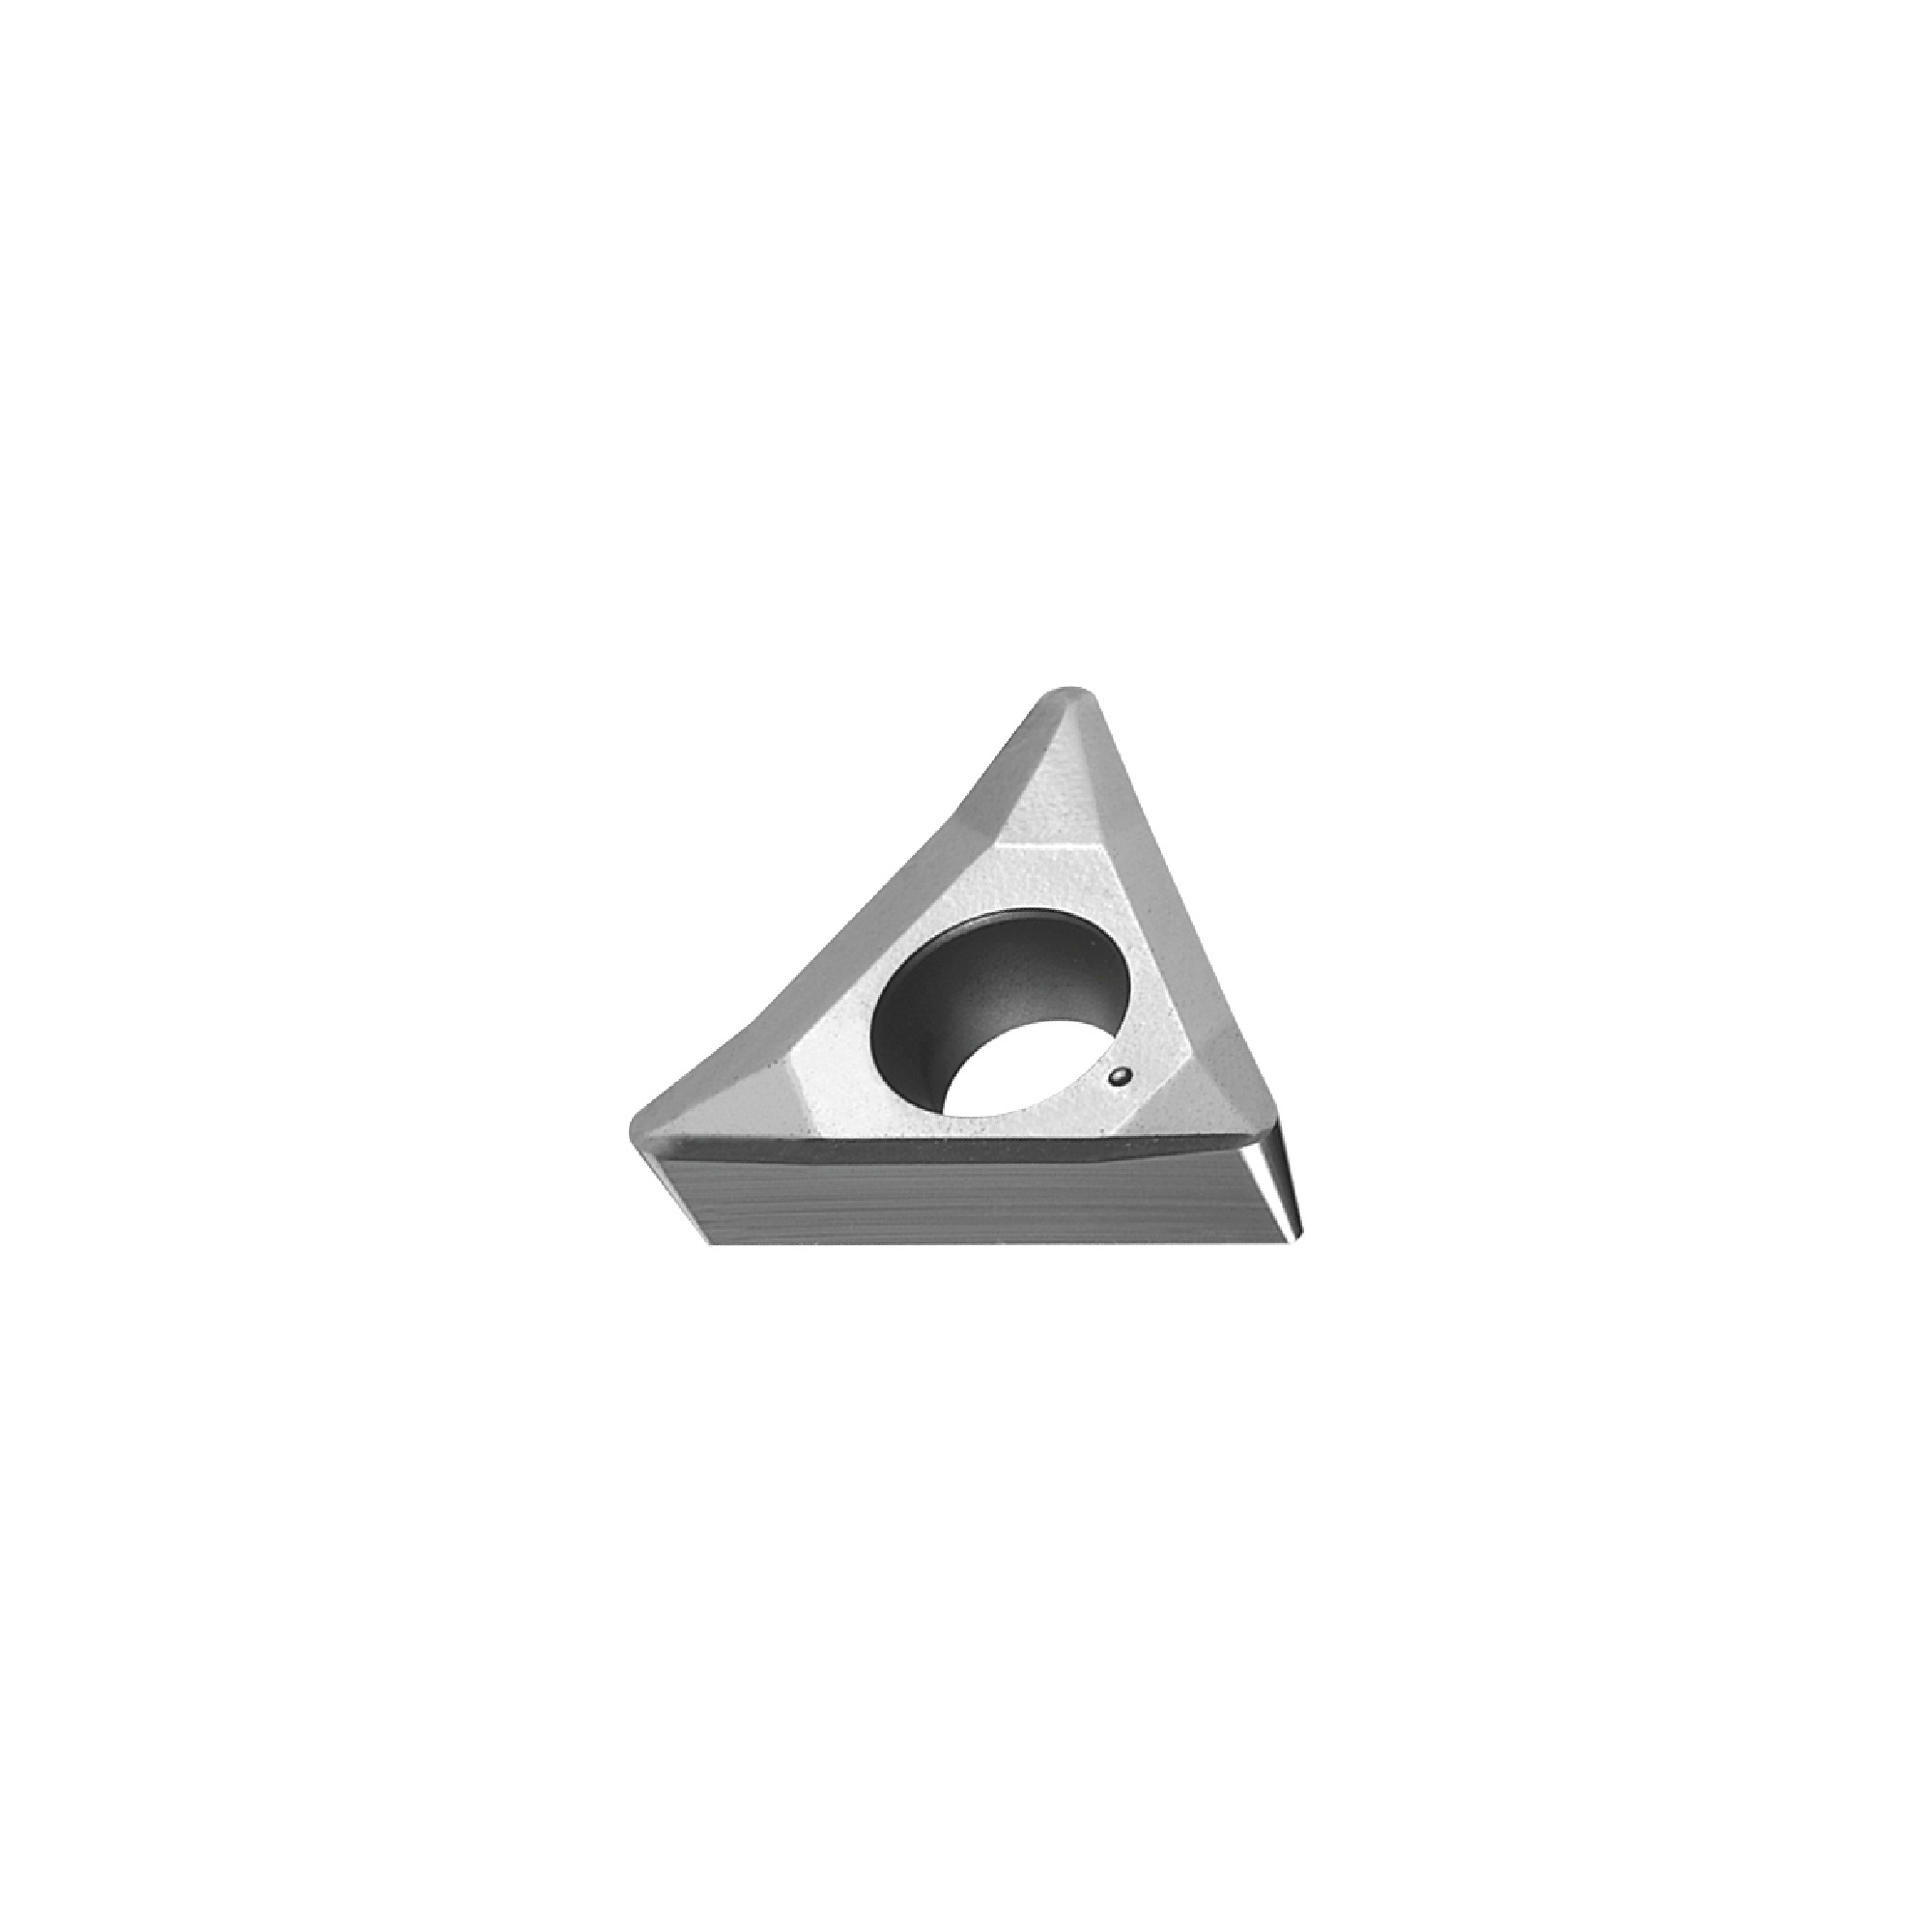 ARNO - TCMT2(1.5)1A-PM1 AM5120 - 60&#176; Triangle / Indexable Carbide Turning Insert